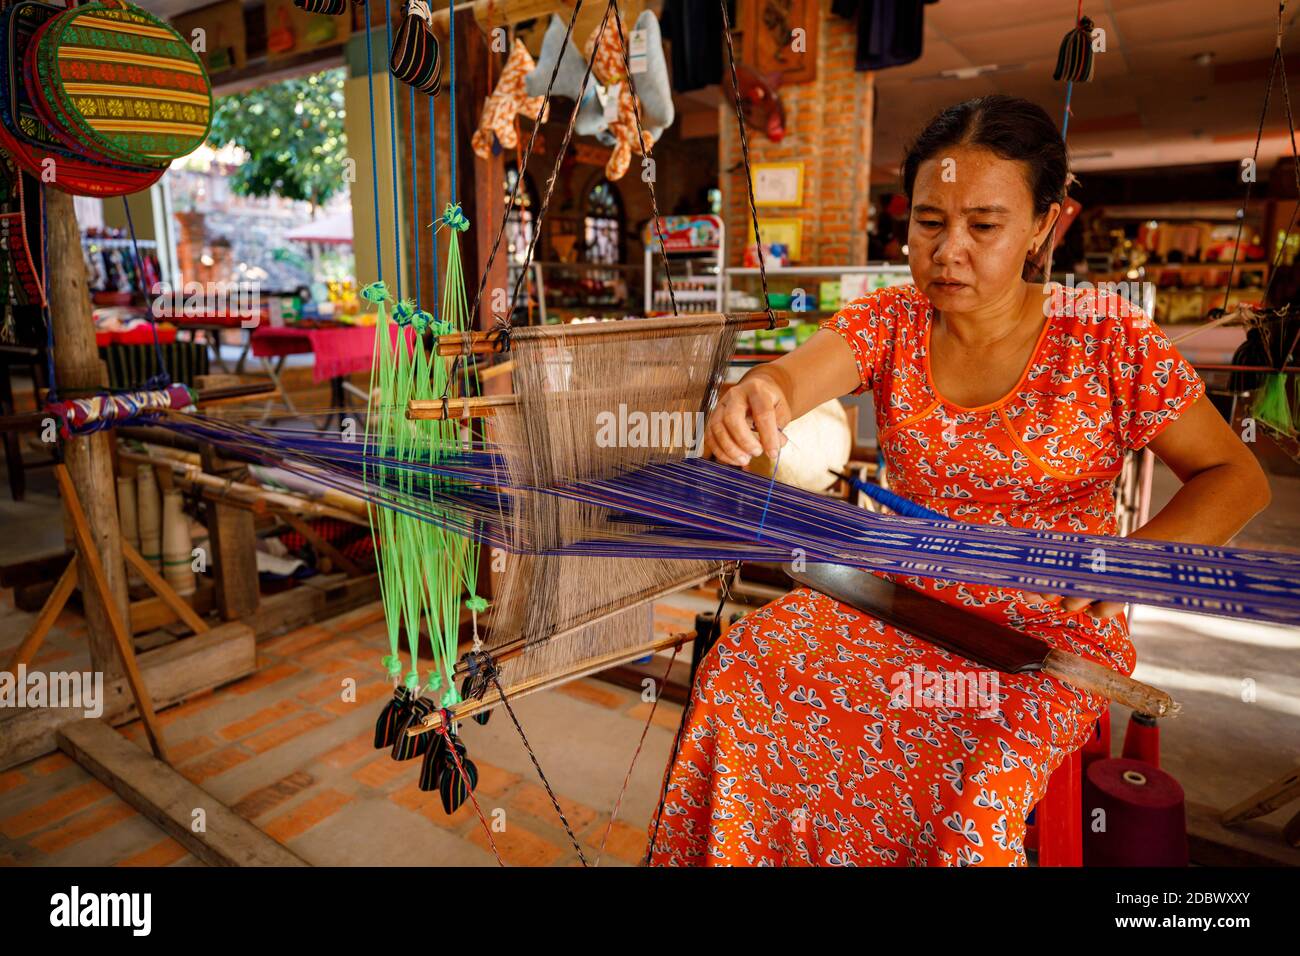 Handcraft and weaving from a woman in Vietnam Stock Photo